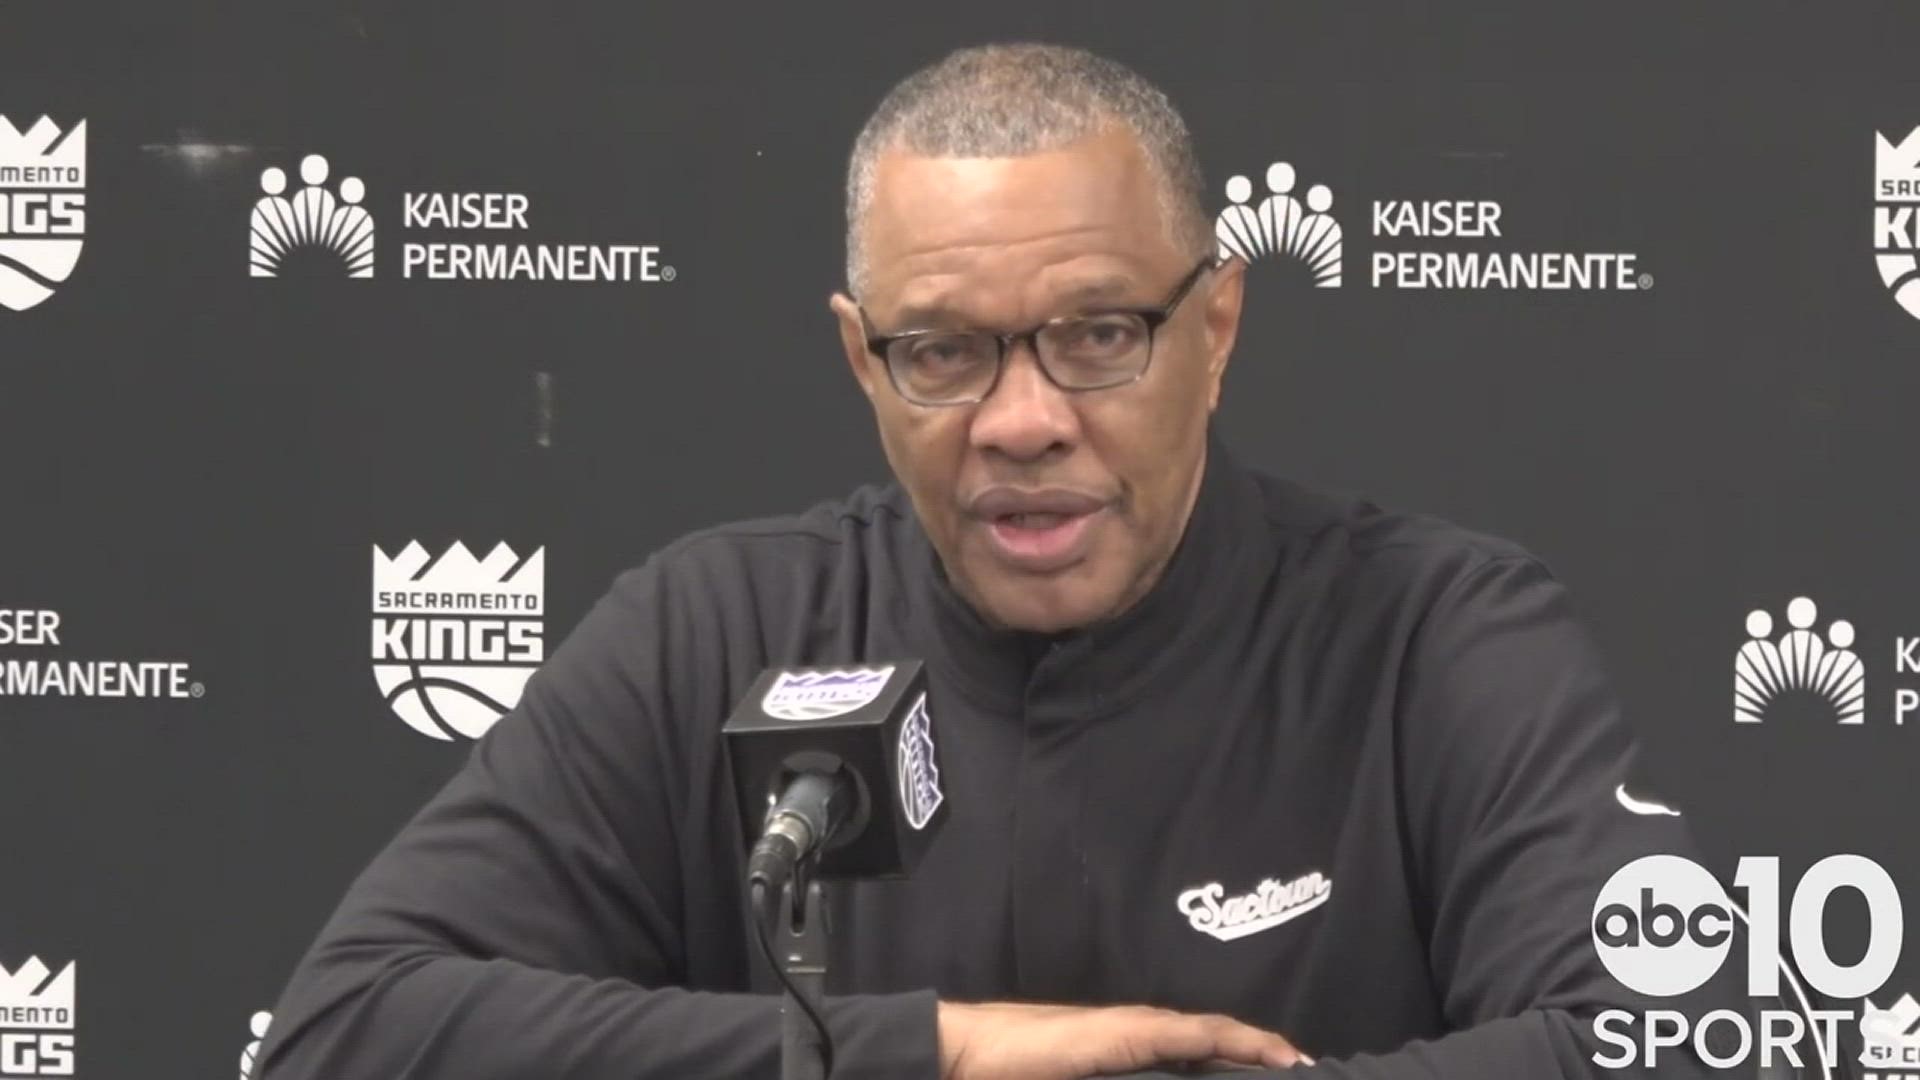 Alvin Gentry talks about Wednesday's 125-121 victory over the Portland Trail Blazers in Sacramento, his first win as the Kings' interim head coach.